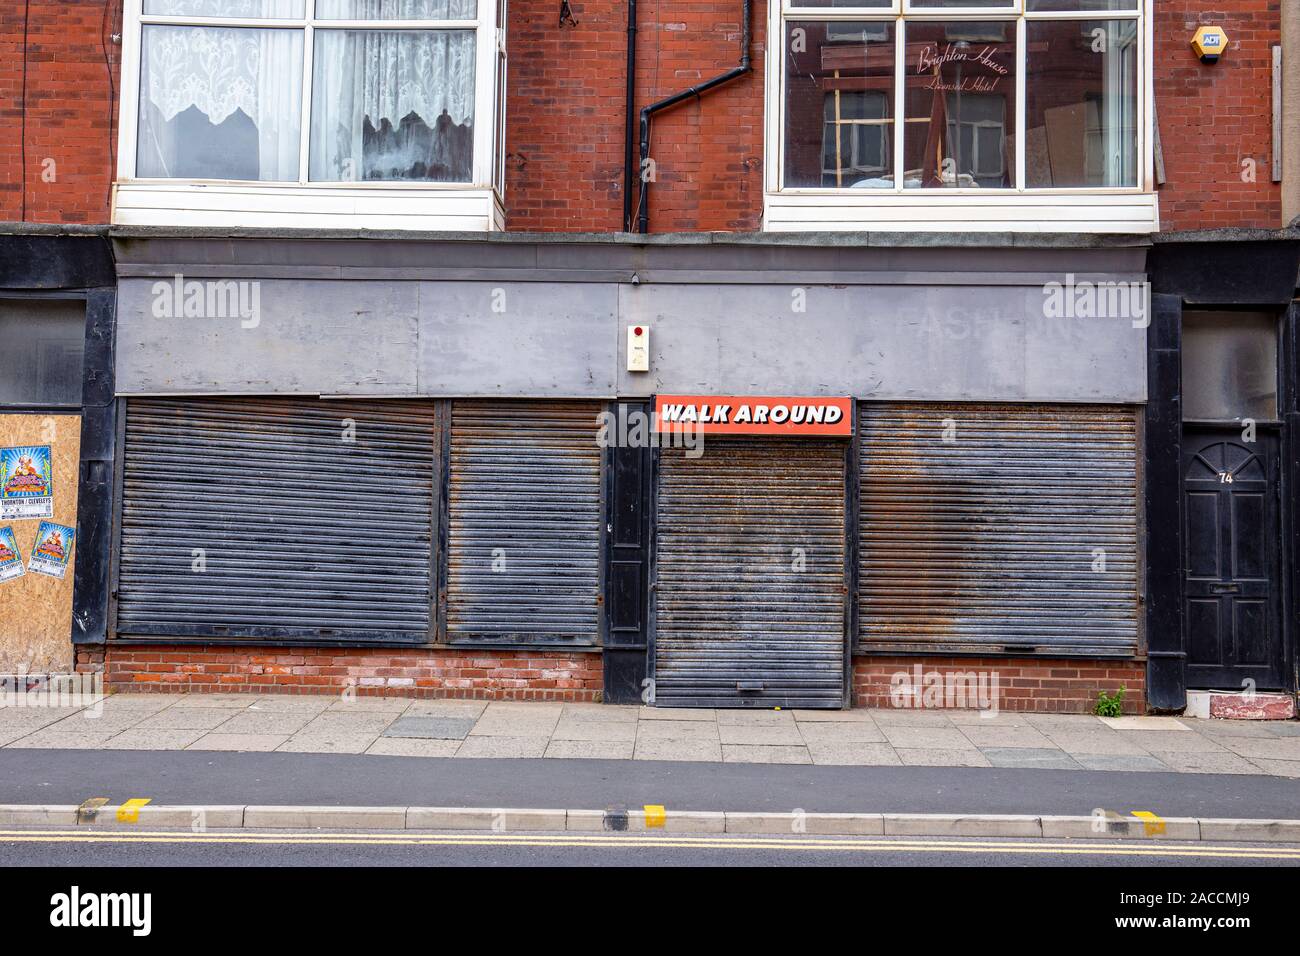 Walkaround sign on closed and shuttered shop in Blackpool Lancashire UK Stock Photo